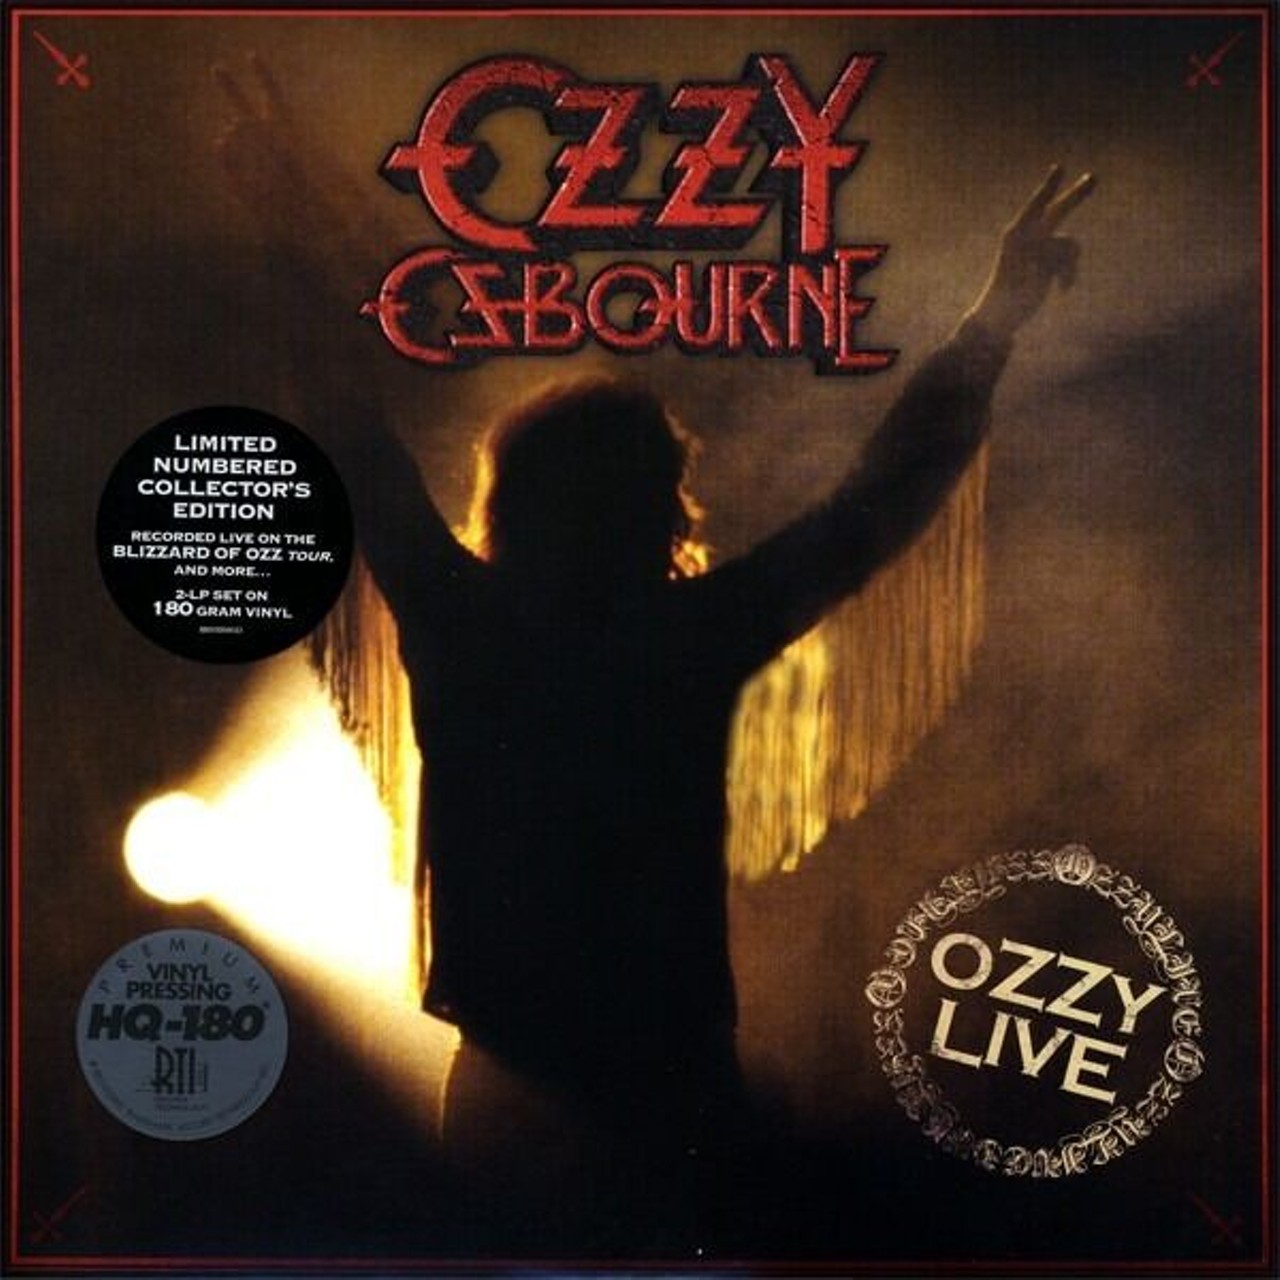 Ozzy Osbourne: "Ozzy Live"
This 1981 recording was released as a double album on Record Store Day in 2012, capturing the former Sabbath frontman and late guitar ace Randy Rhoads in prime form. The recording first circulated as a bootleg, purportedly captured in Indianapolis, but Ozzthusiasts have since researched the recording date and confirmed that it actually happened right here in SA.
Photo via Epic